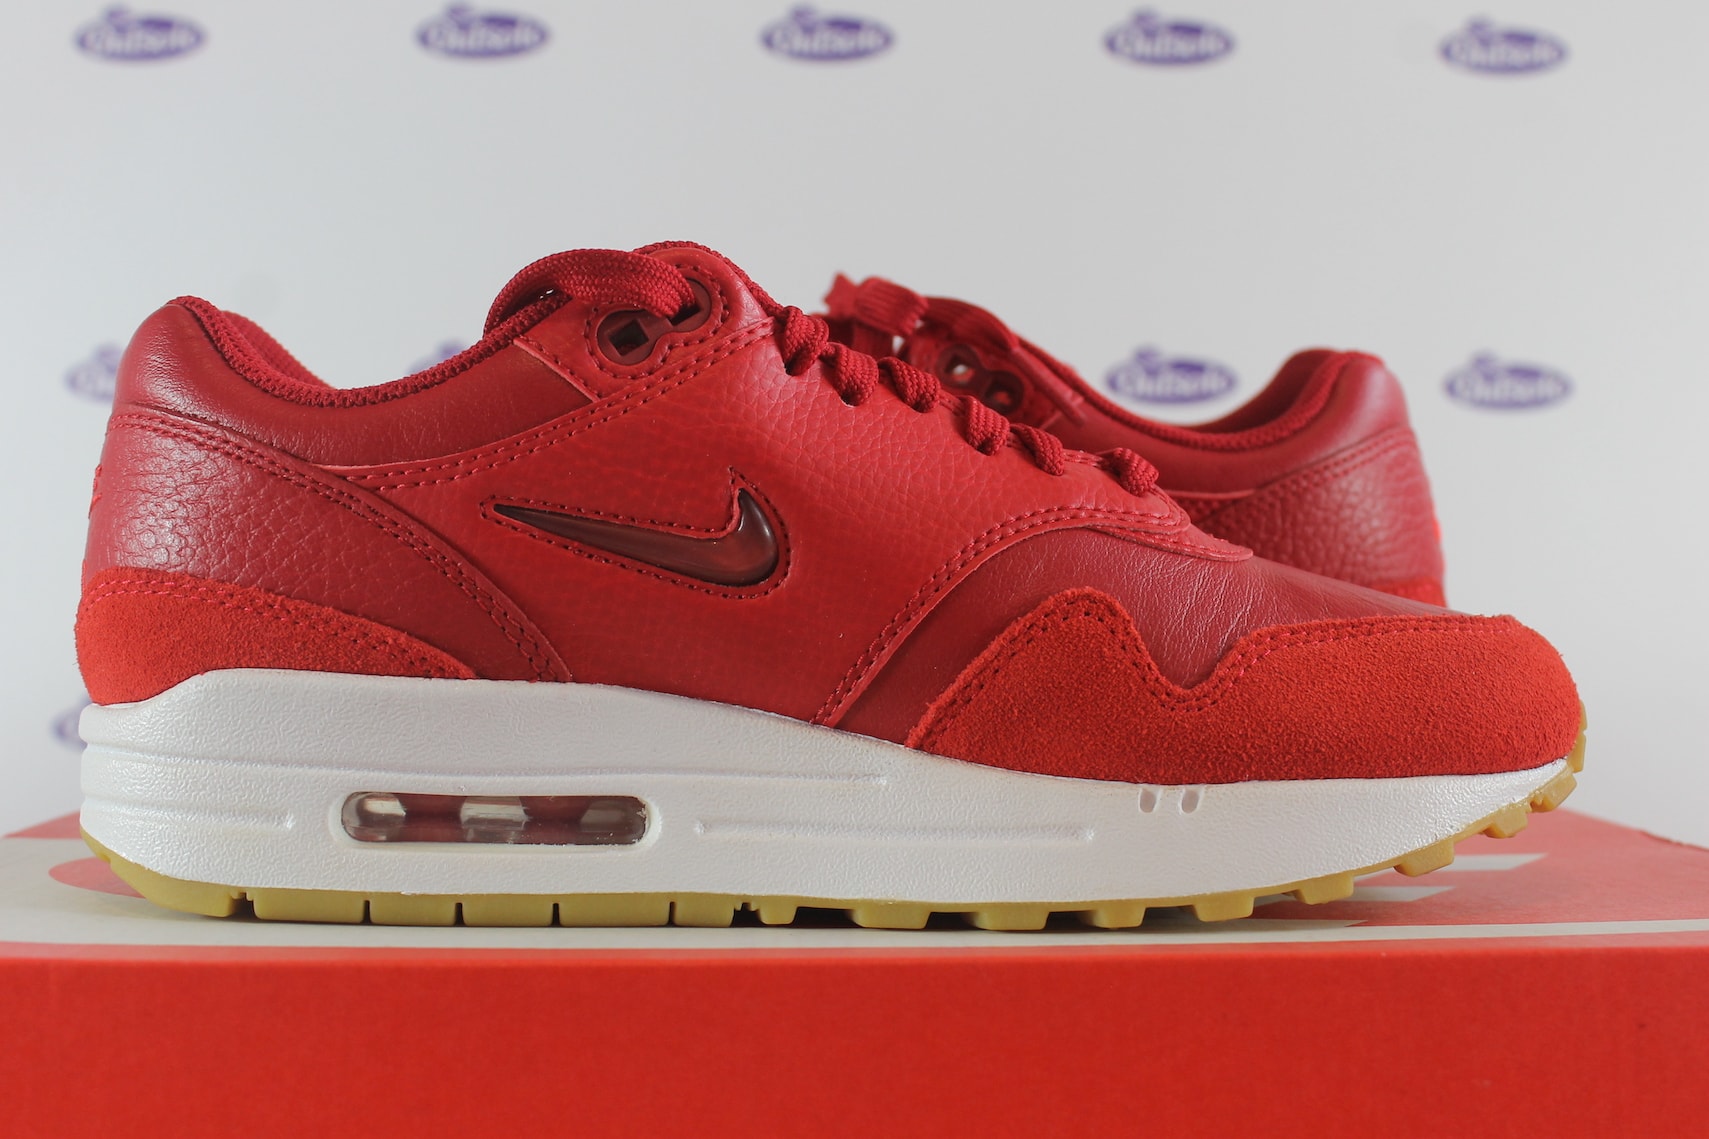 Nike Air Max 1 Premium SC Gym ✓ In stock at Outsole